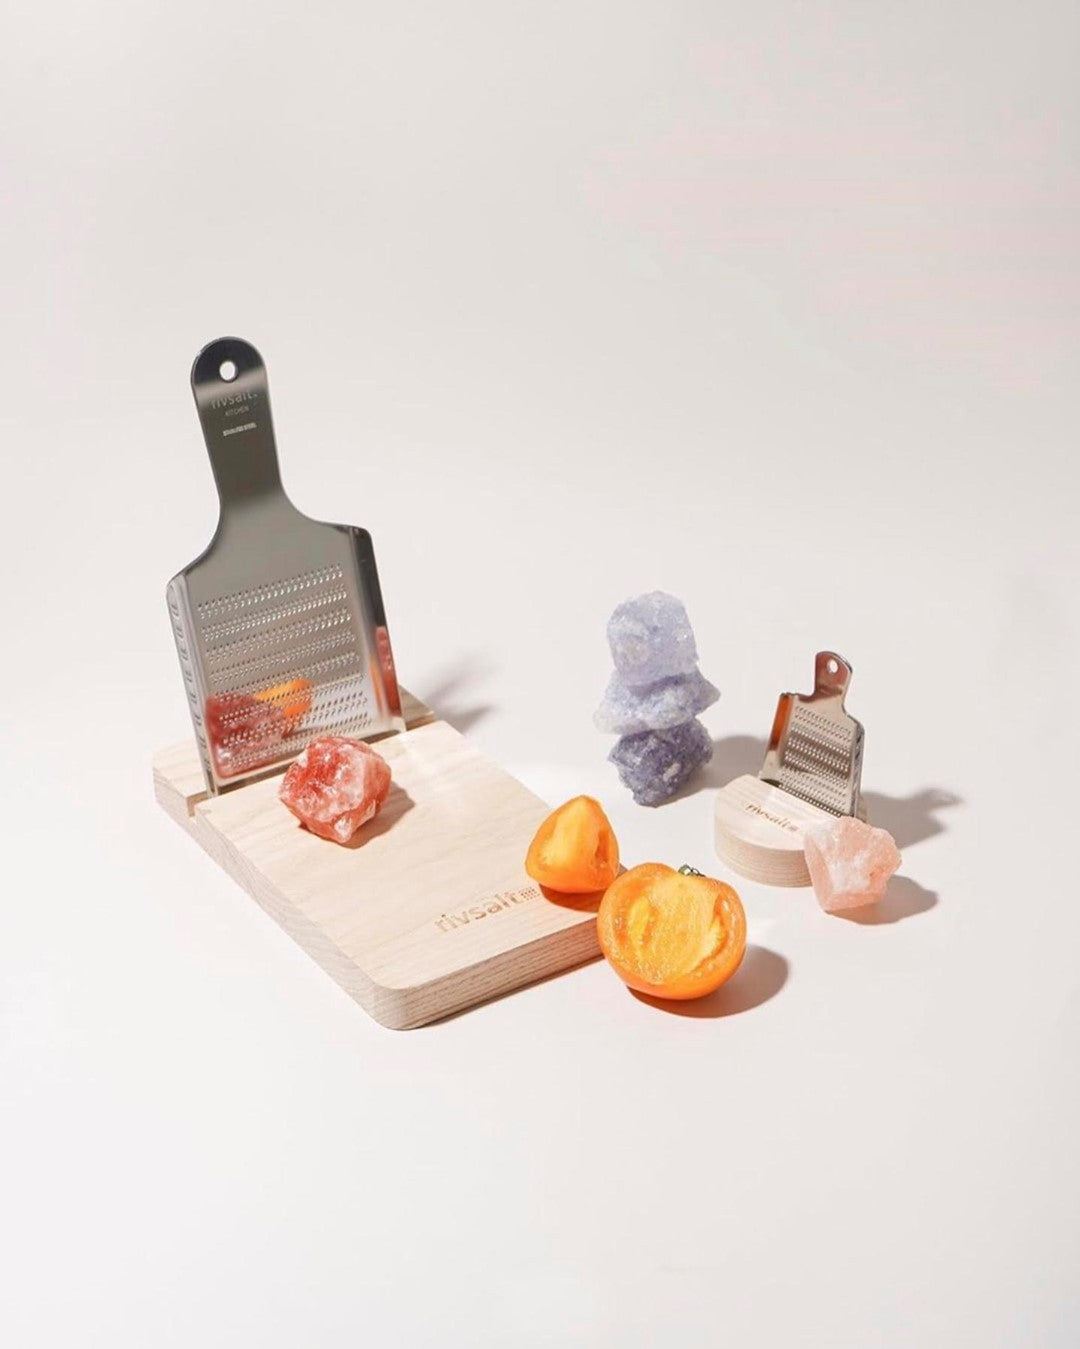 Himalayan Salt Rock Kitchen Grater and cutting board by Rivsalt with gemstones and orange tomato 